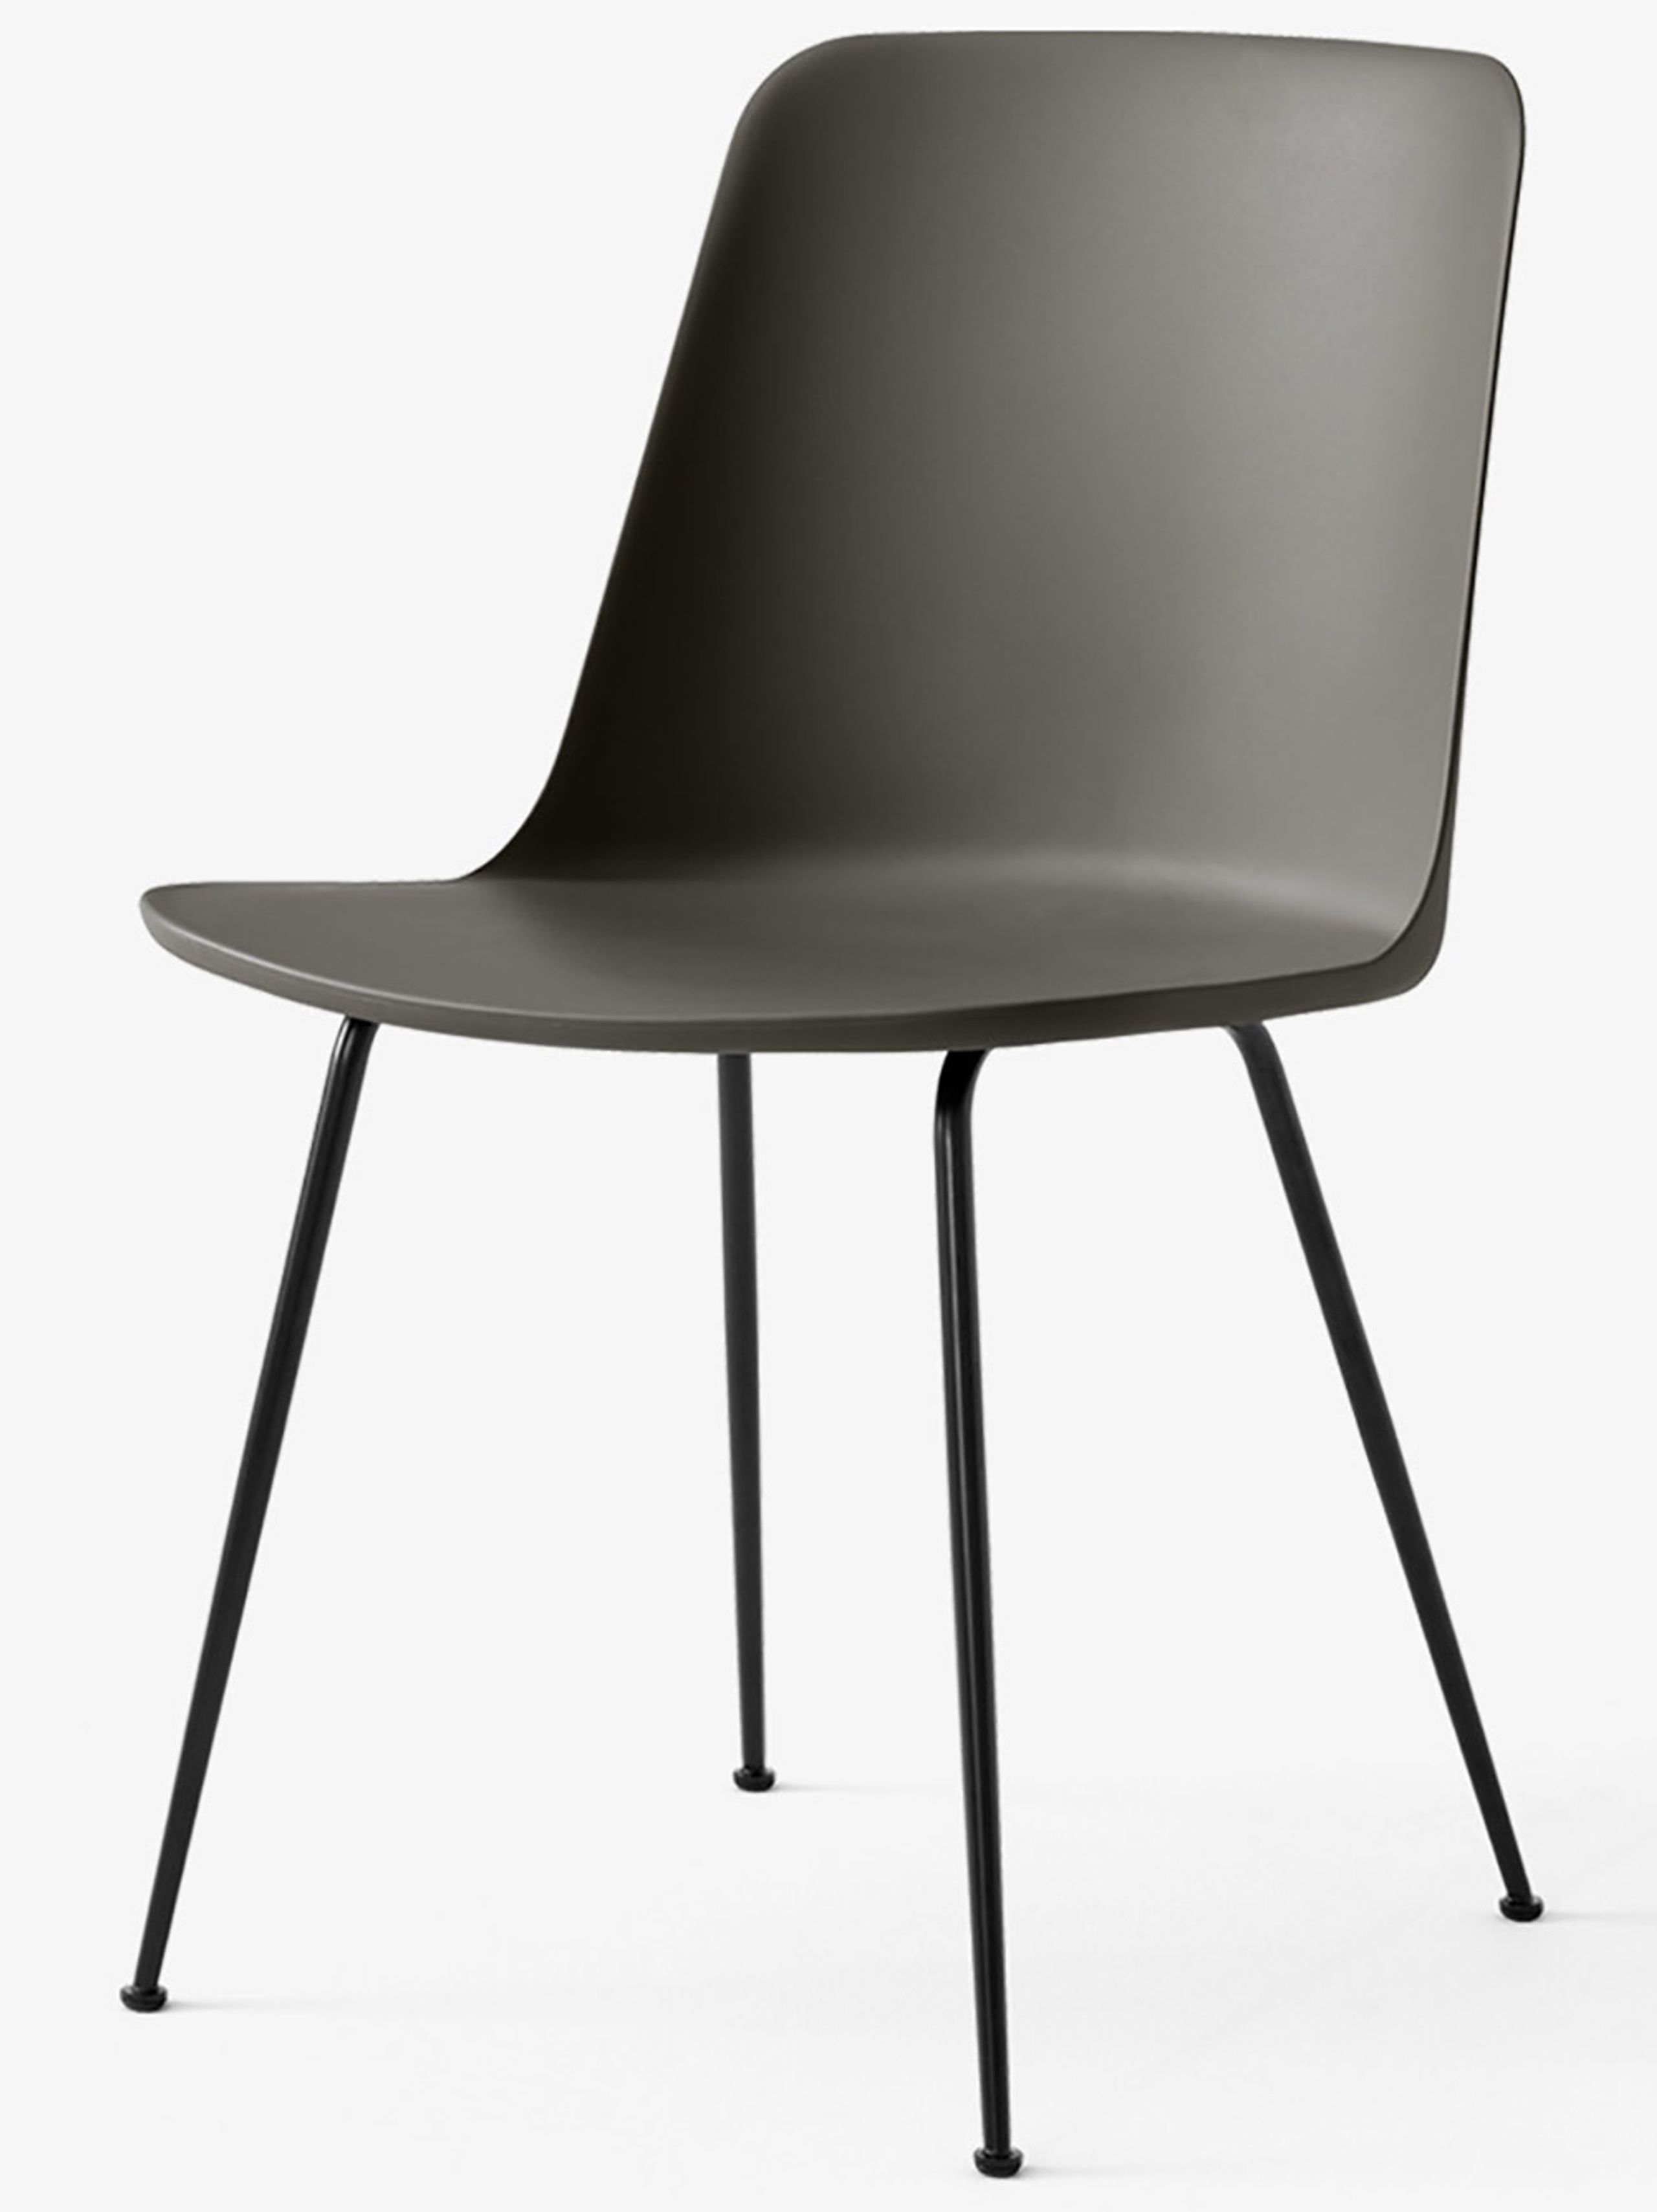 &tradition -  - Rely - HW6 - Seat: Stone Grey